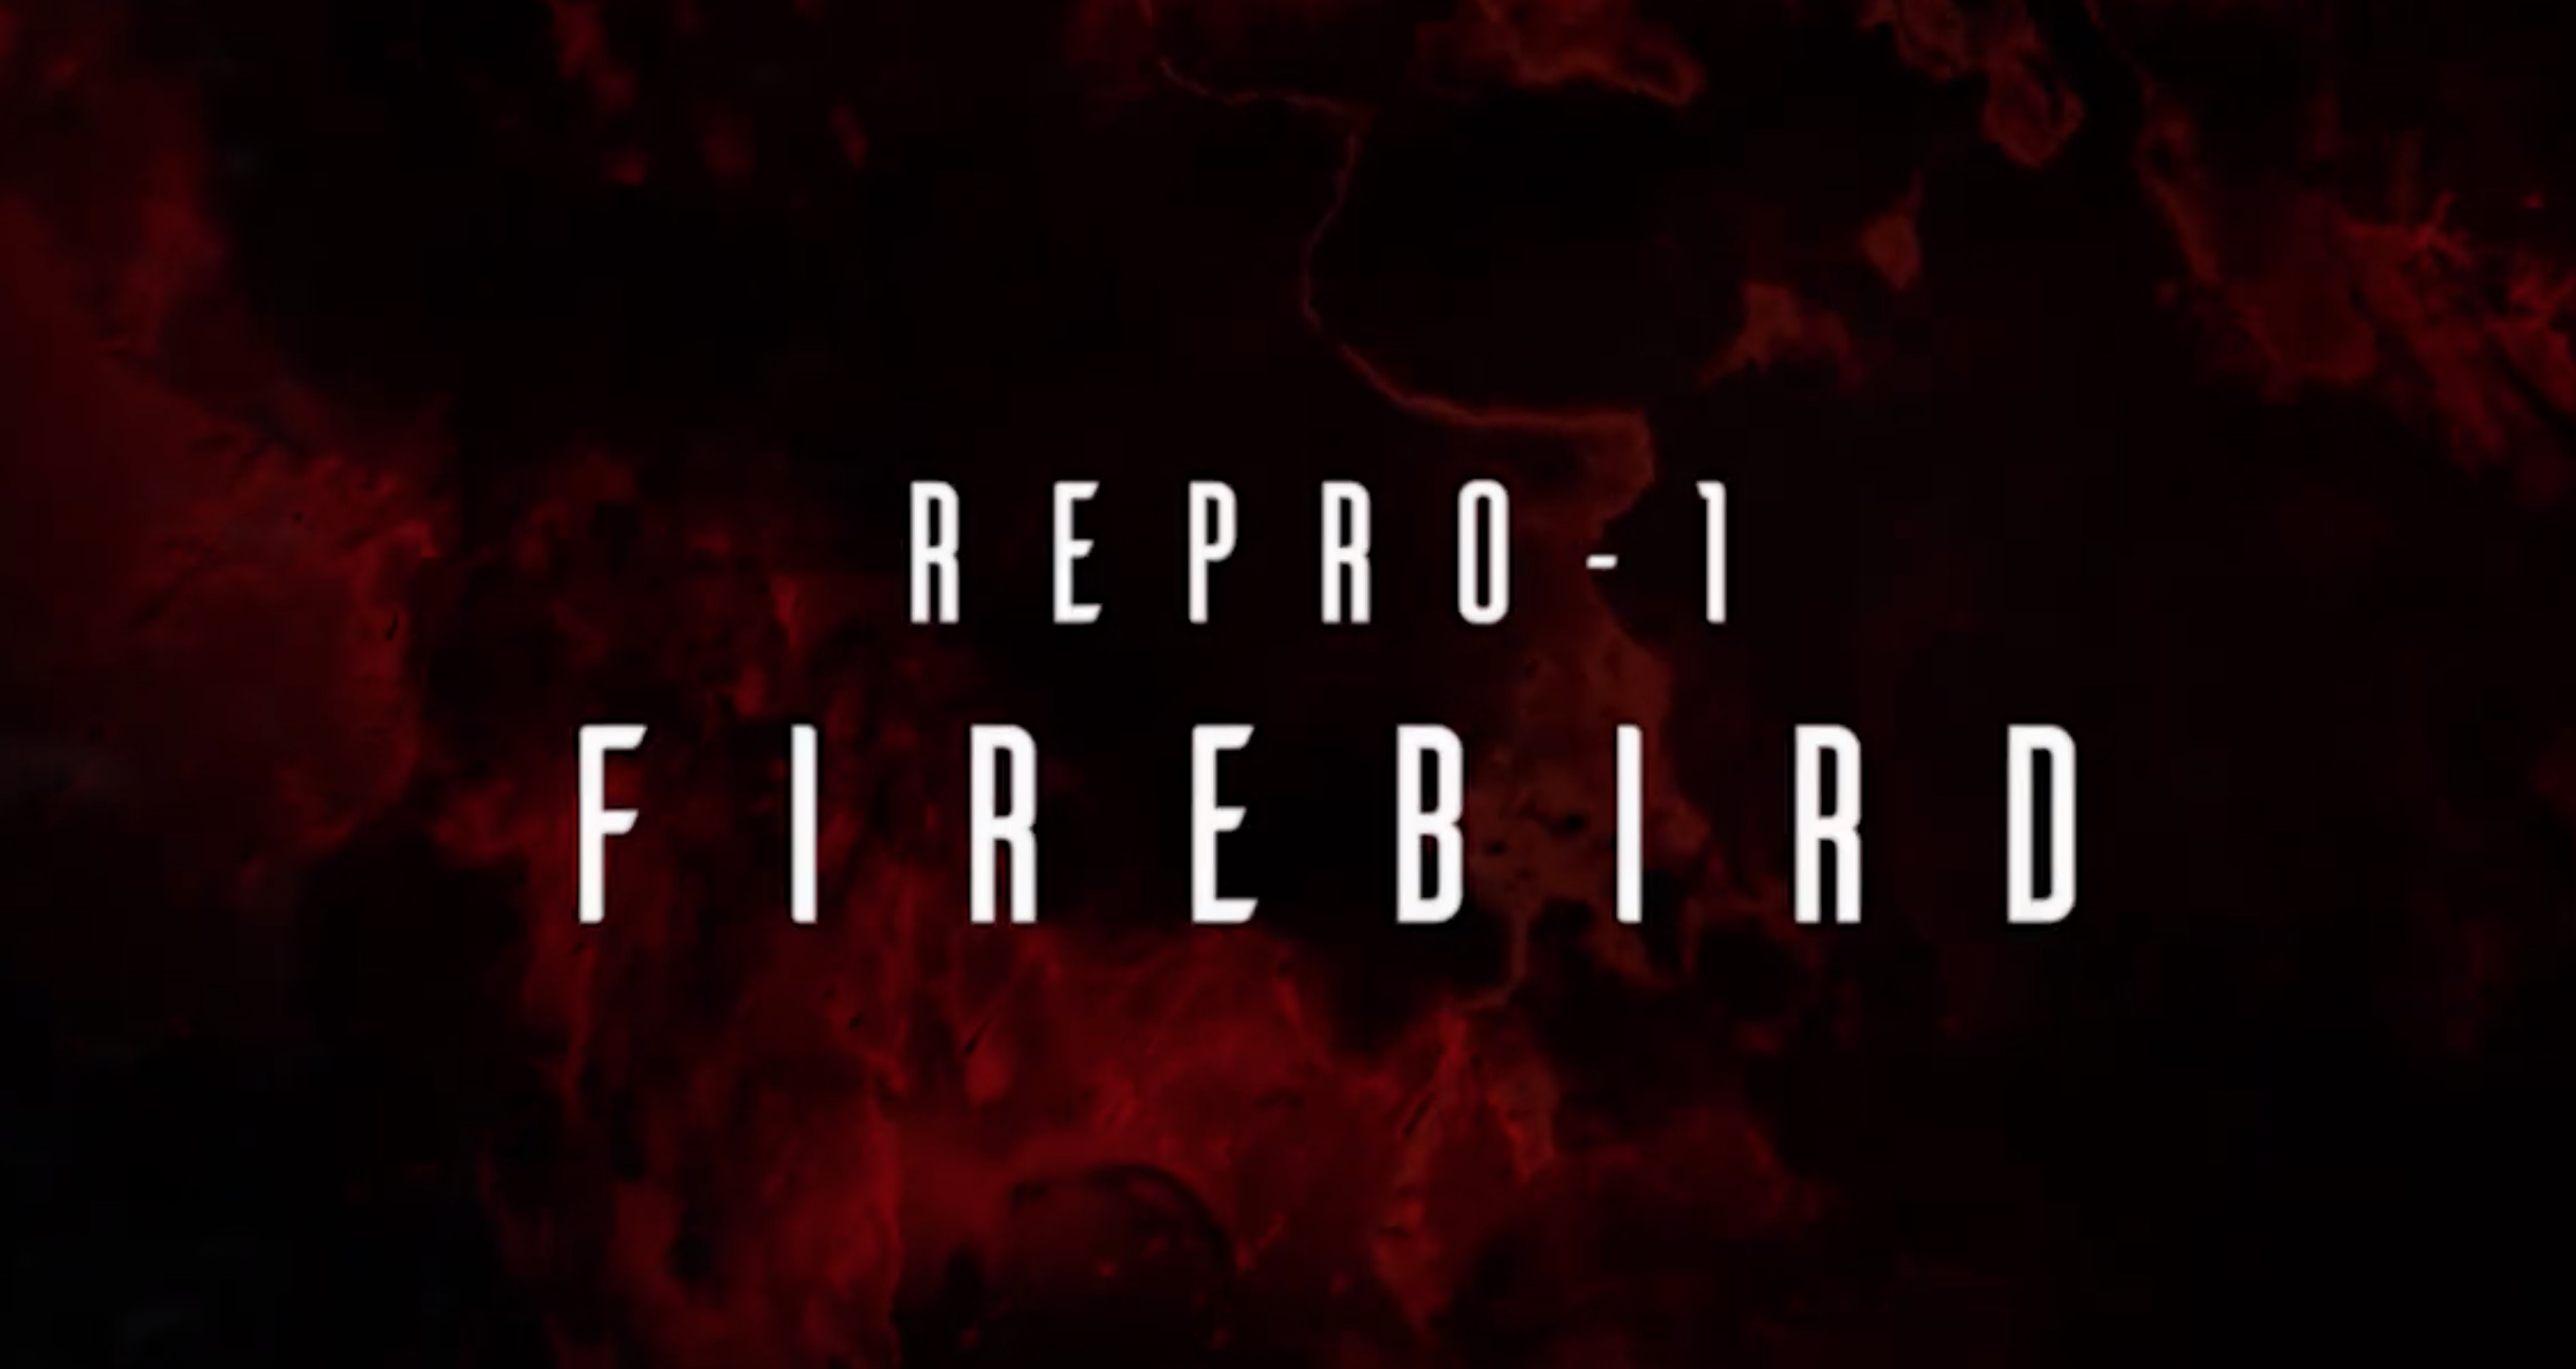 Upcoming RePro-1 Firebird by The Unfinished